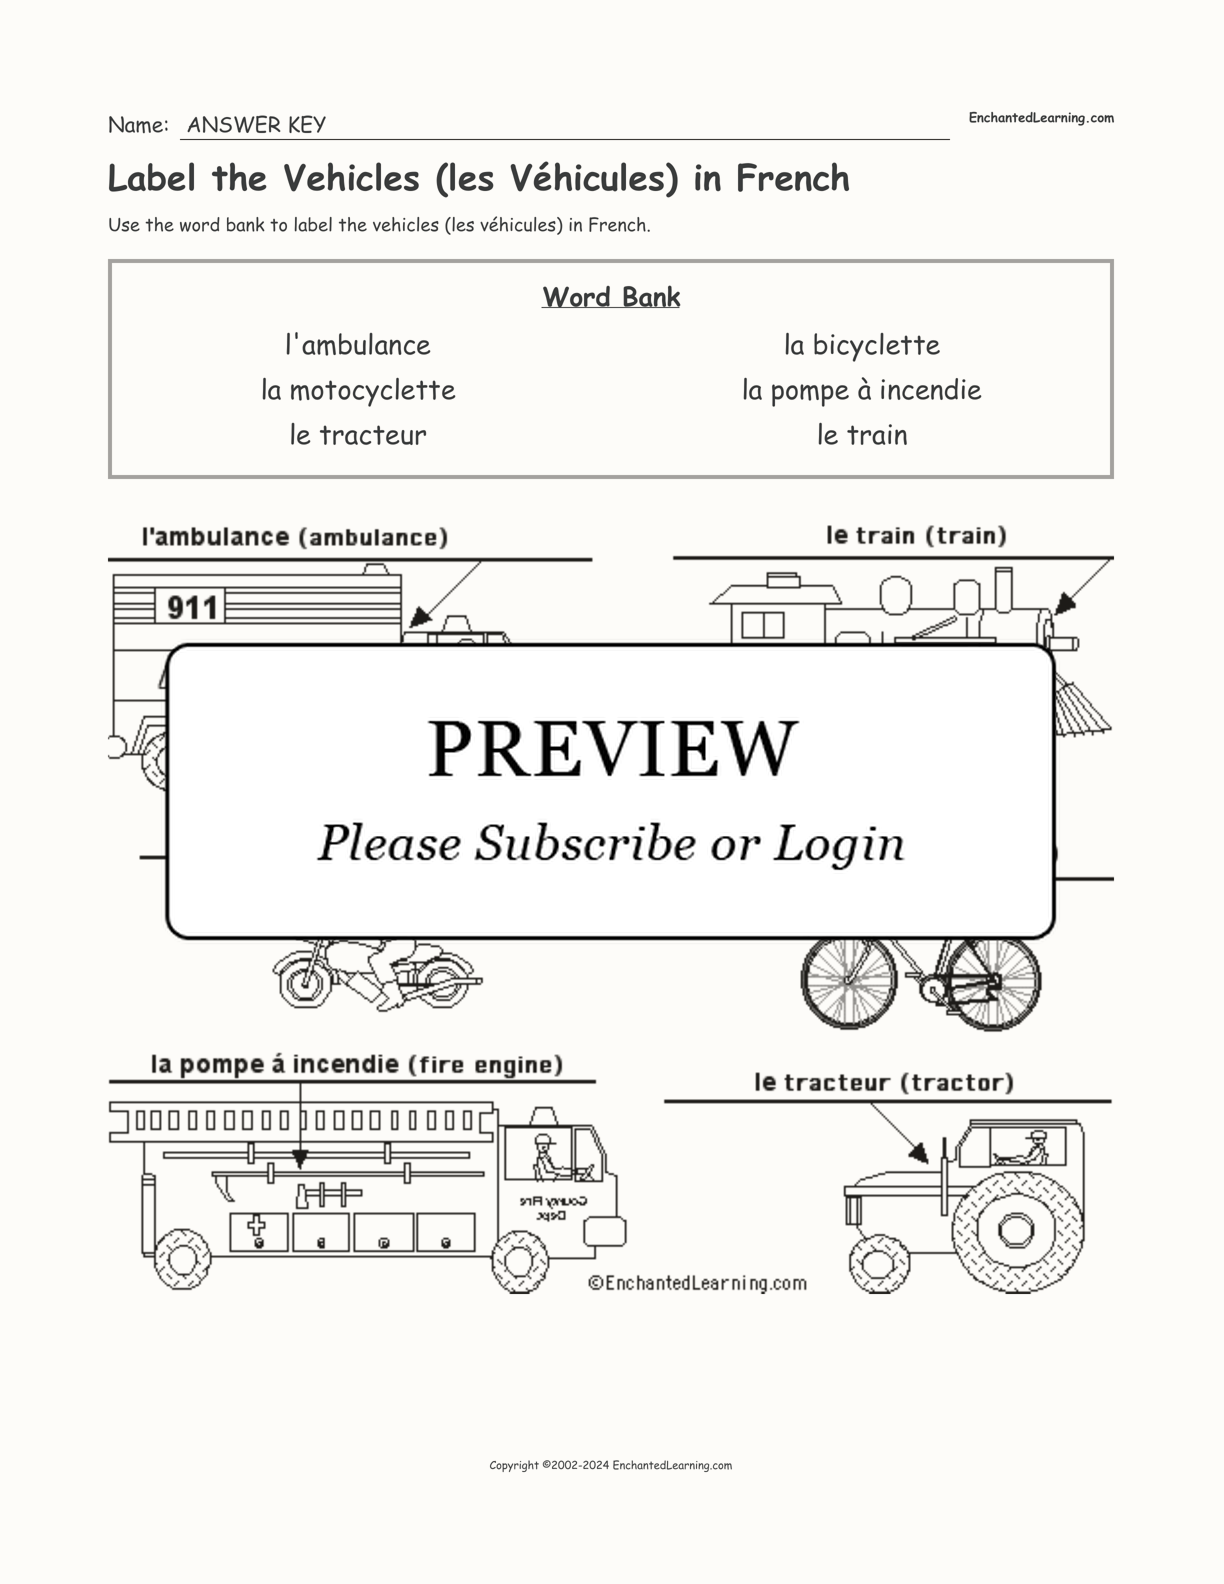 Label the Vehicles (les Véhicules) in French interactive worksheet page 2